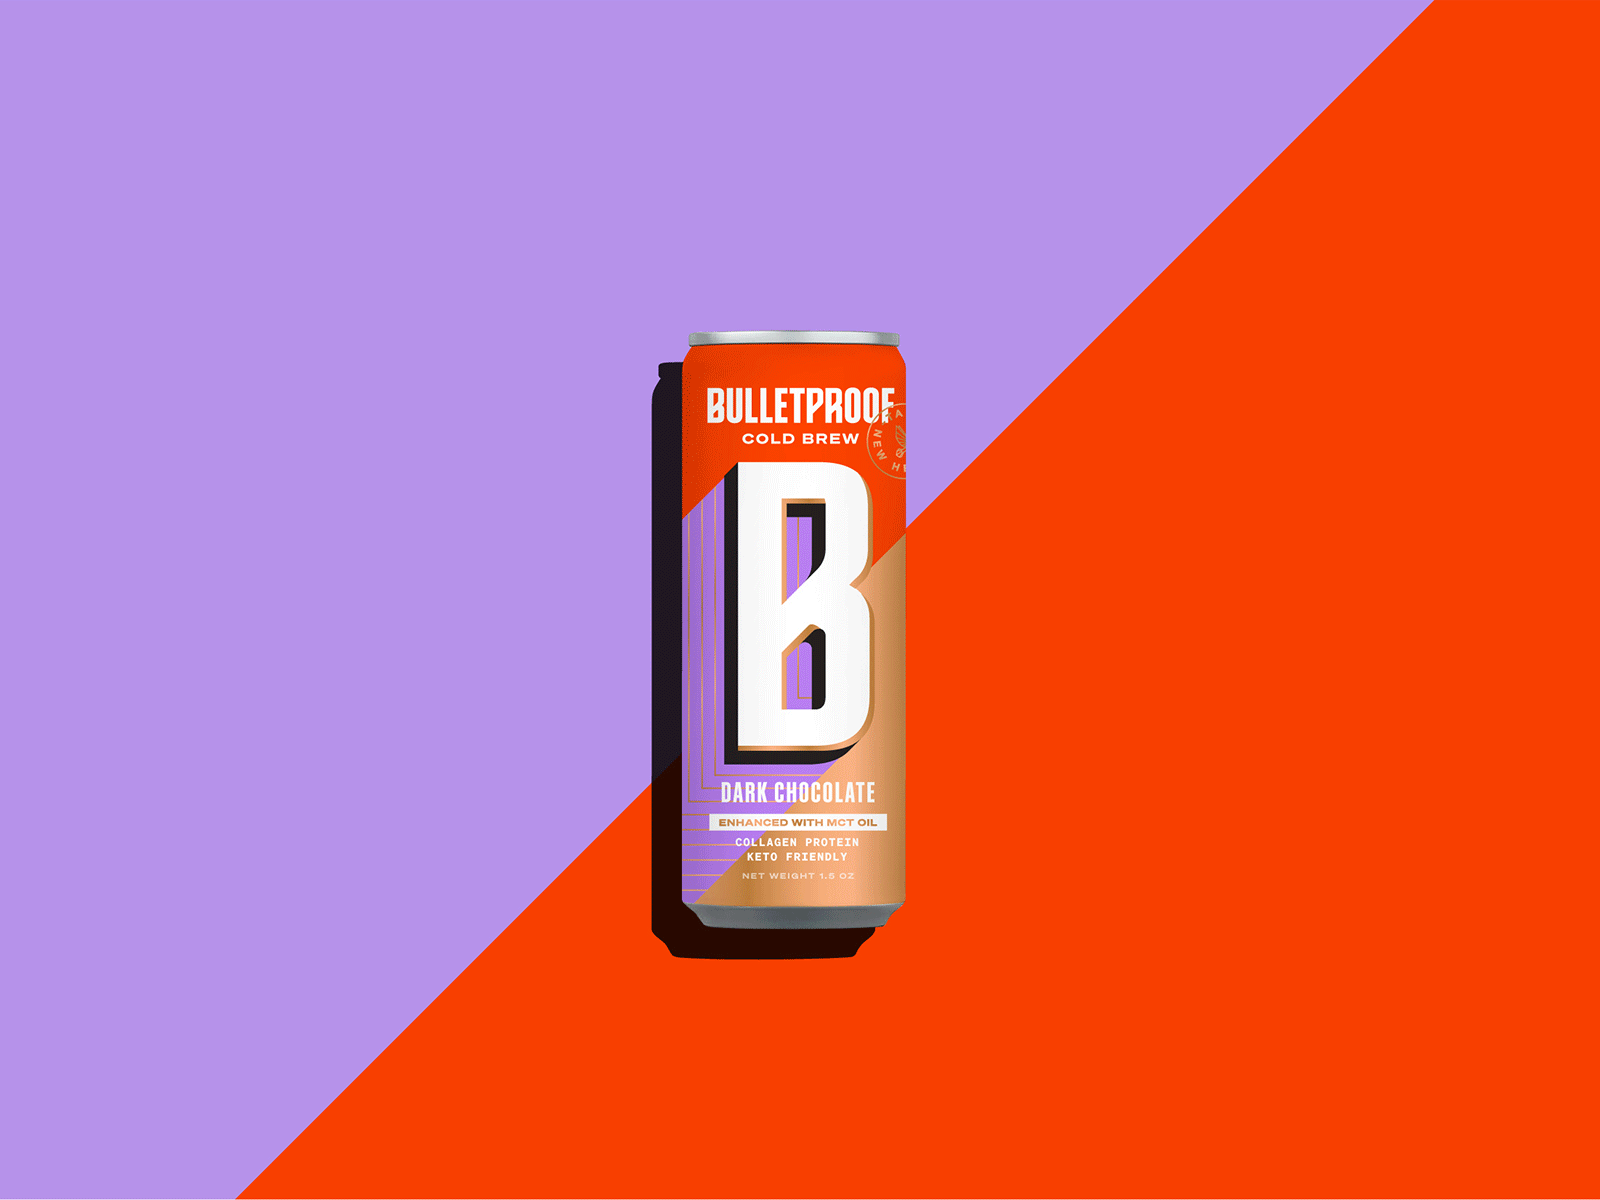 Bulletproof - Packaging Concept - RTD Coffee coffee empowerment food gold iconic logo packaging